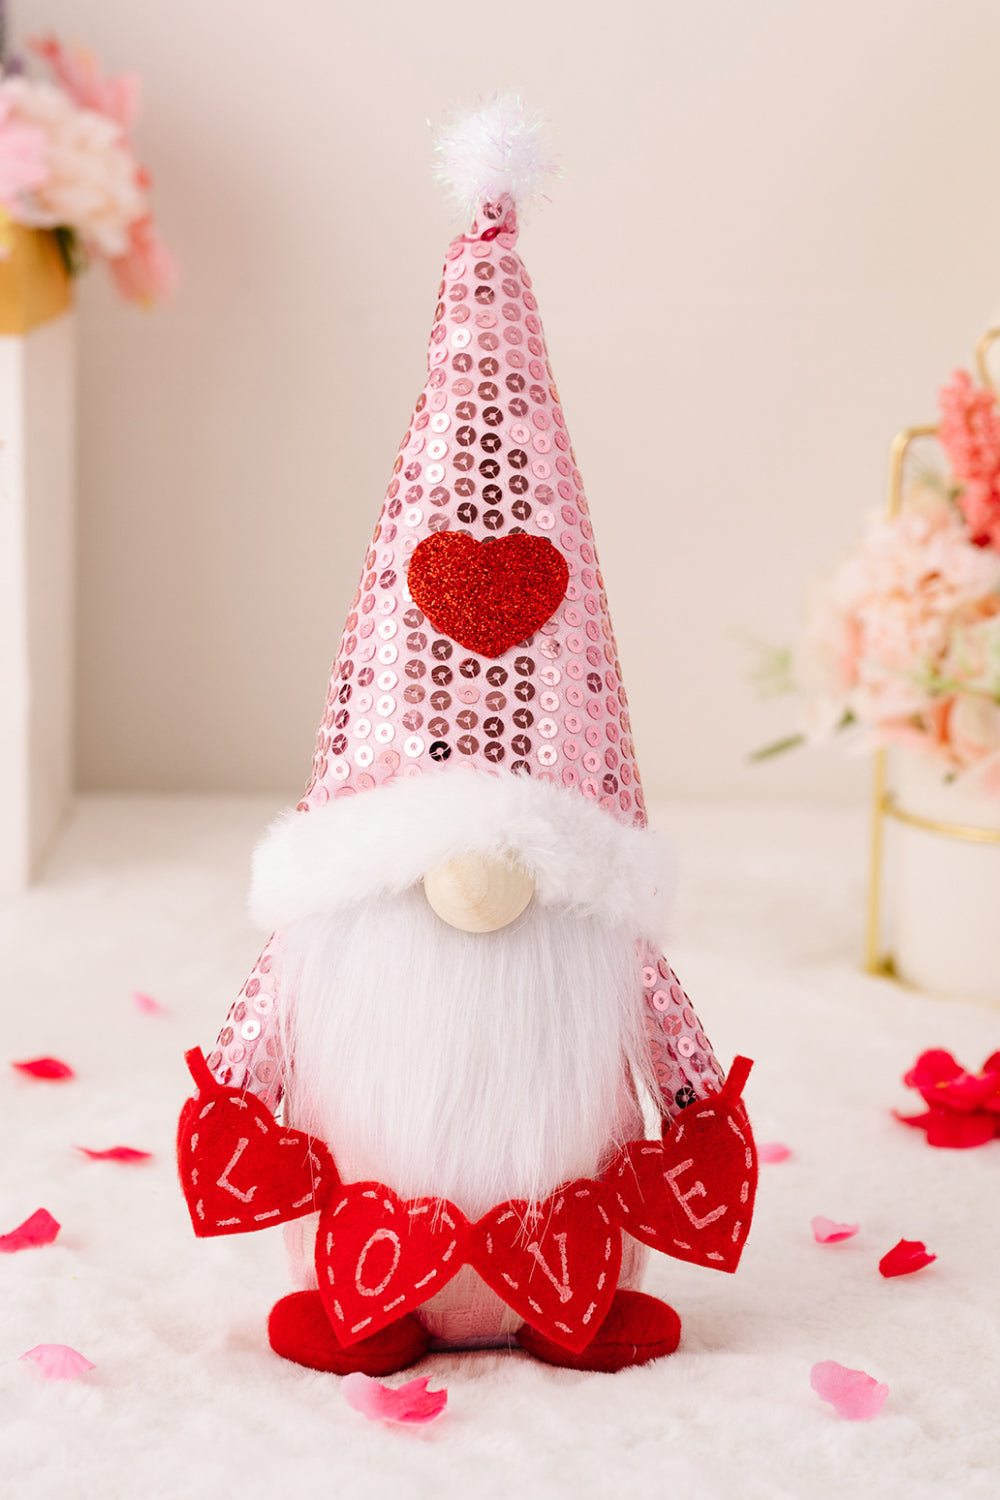 GNOME COLLECTIBLES--Lovely, Sequined Heart Pointed Hat Gnomes (1), choose from two options or buy them both!!  Share them and cheer anyone with these loving, fun and collectibles